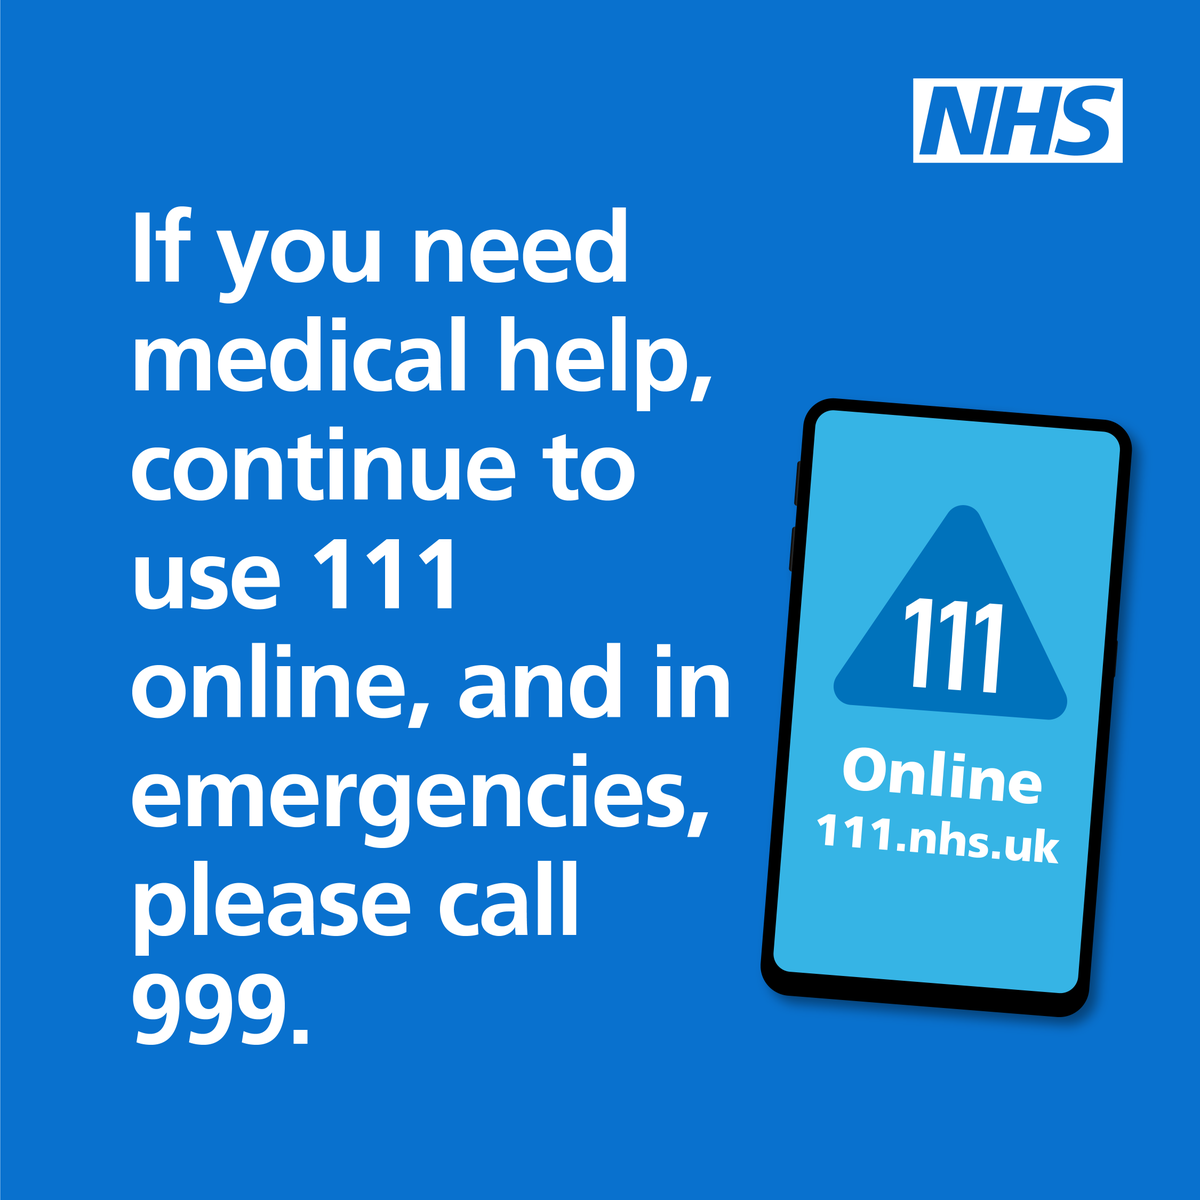 Irrespective of any industrial action, please do not hesitate to come forward to get the care you need. If it’s less urgent, please try NHS 111 Online or your local pharmacy or GP practice first.